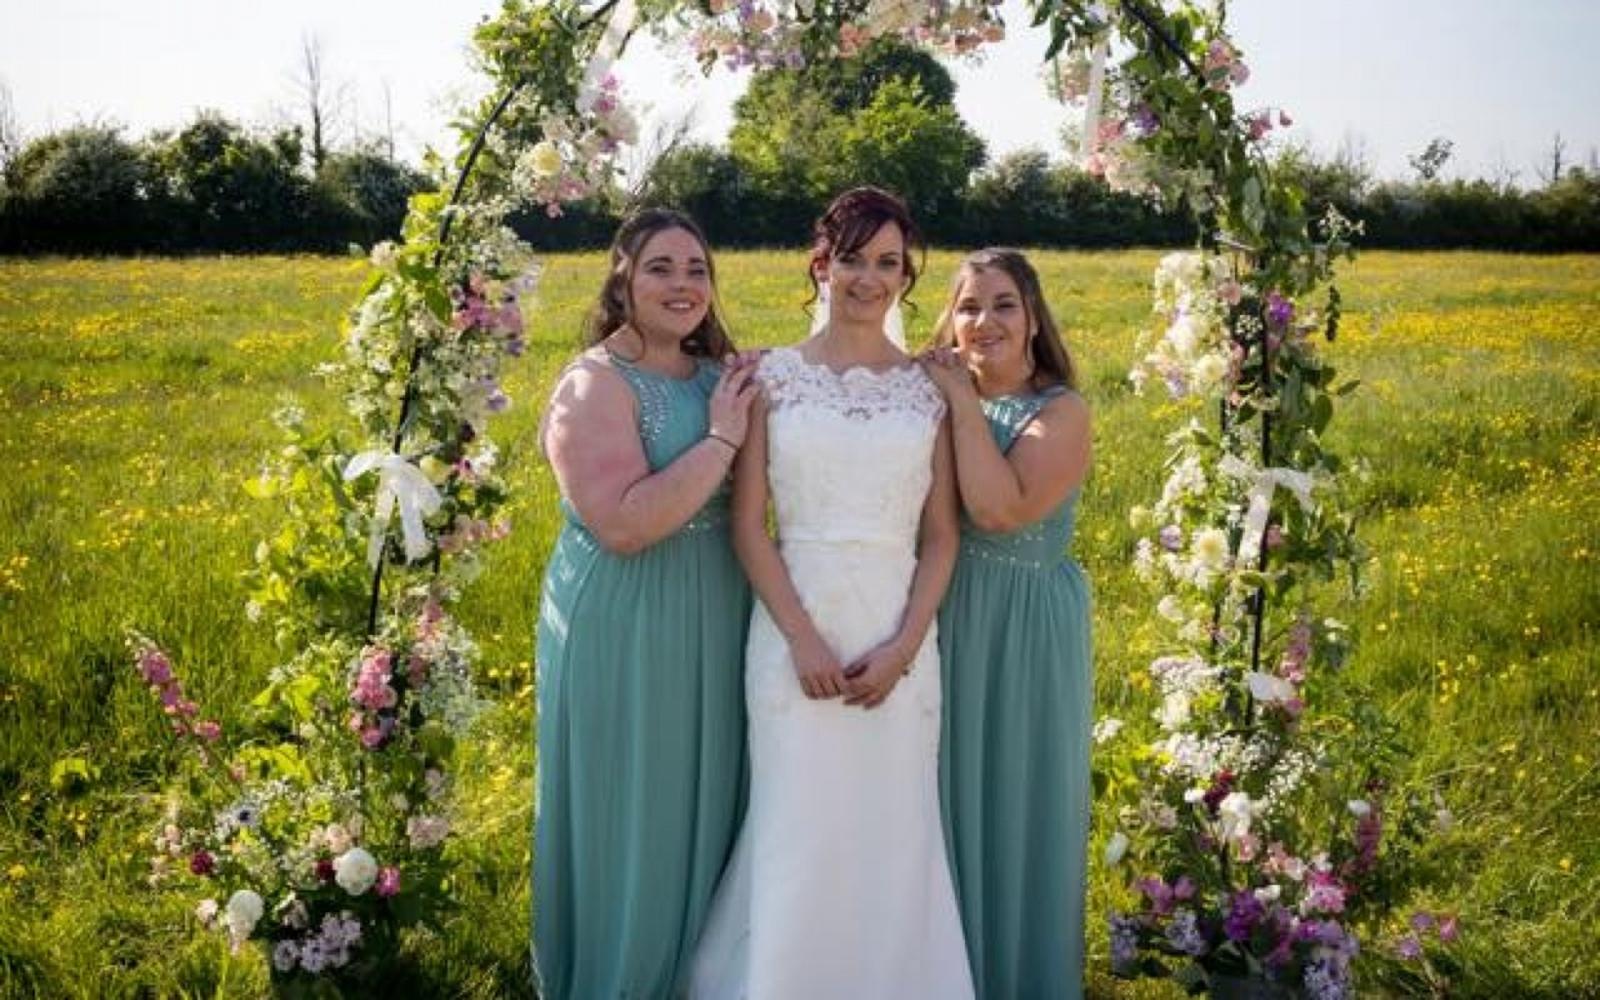 Real Wedding Georgia Powell Hair Makeup Artist Wedding Whitewed Directory Approved Bride Prince Hill House Worton Devizes Wiltshire Floral arch Bride Bridesmaids